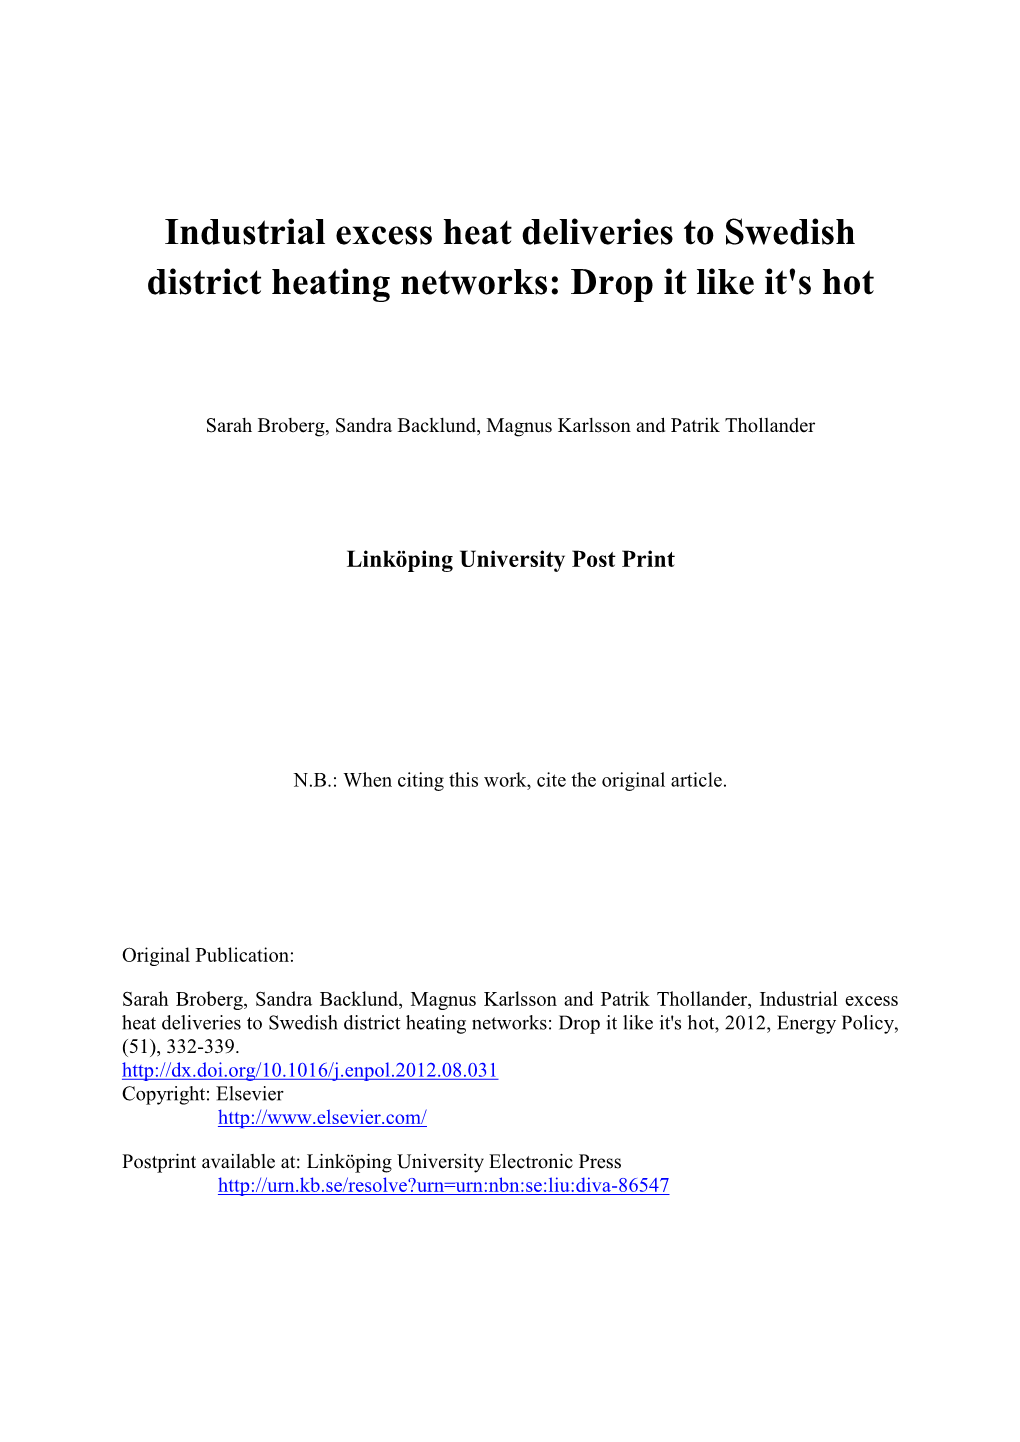 Industrial Excess Heat Deliveries to Swedish District Heating Networks: Drop It Like It's Hot